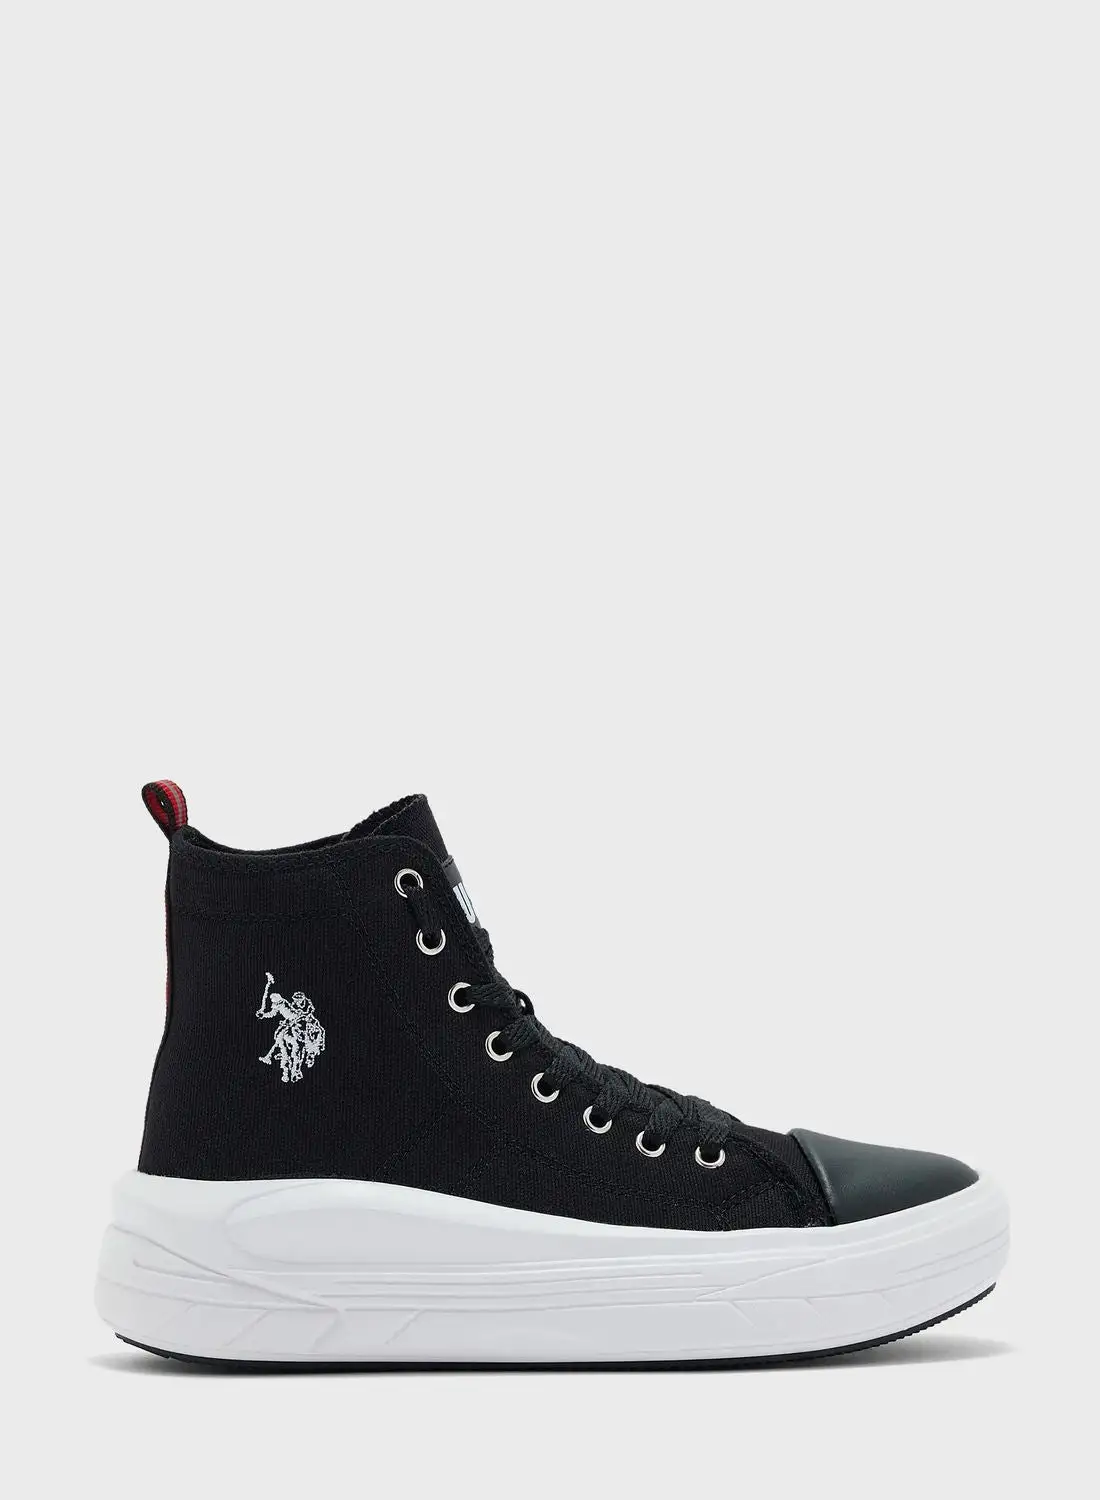 U.S.Polo Lace Up High Top Sneakers